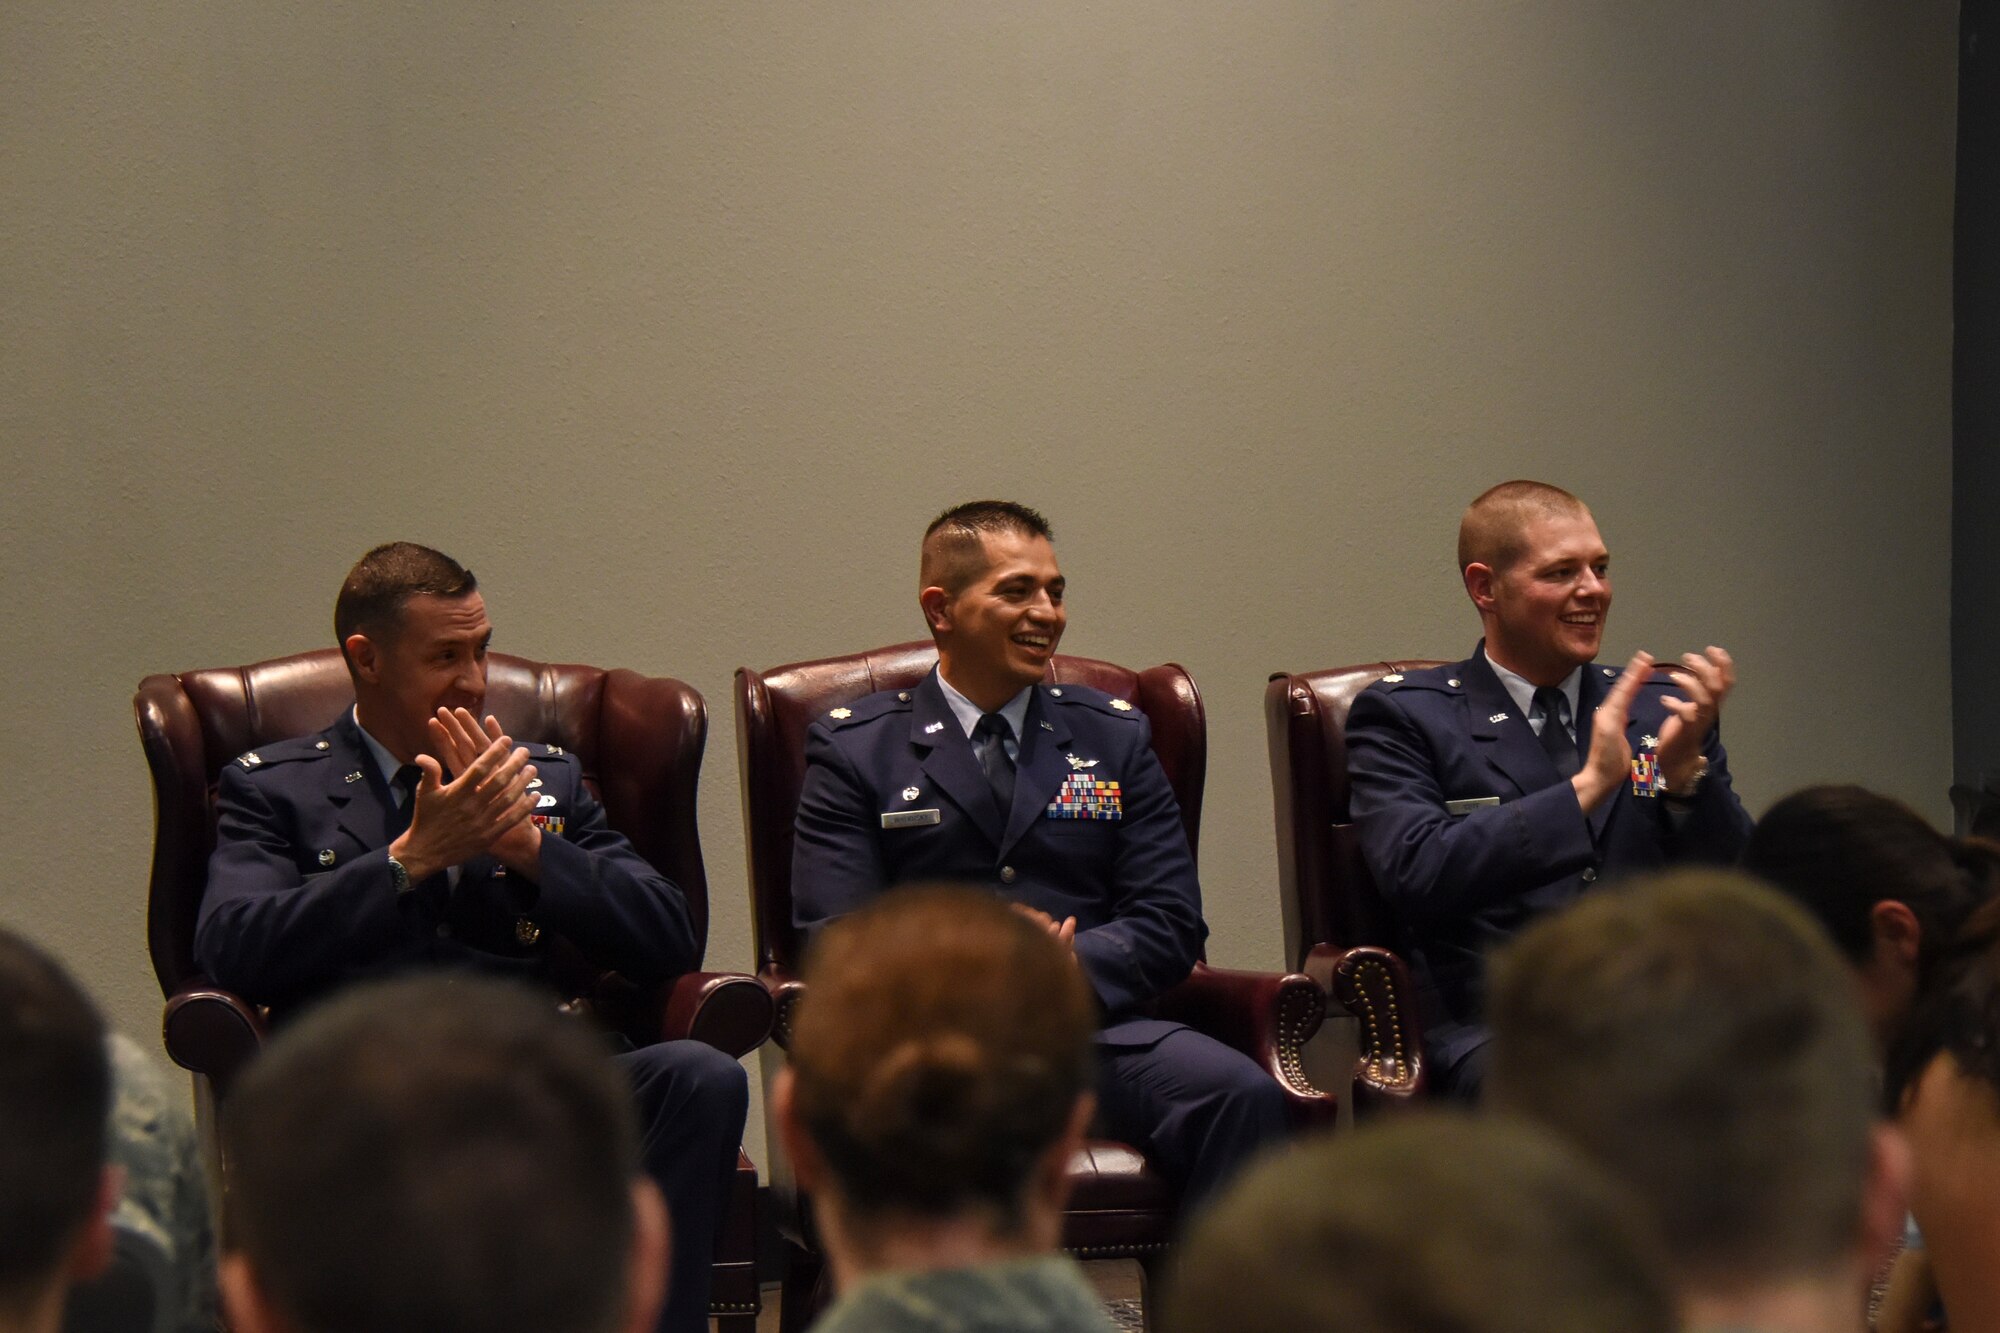 U.S. Air Force Col. Jason Beck, 17th Mission Support Group commander, Maj. Mark Walkusky, 17th Communications Squadron outbound commander, and Maj. David Coté, 17th CS inbound commander, welcome guests of the change of command ceremony in the Event Center on Goodfellow Air Force Base, Texas, May 10, 2018. Goodfellow leadership, members of 17th CS, and family members of both commanders attended the time honored tradition. (U.S. Air Force photo by Airman 1st Class Zachary Chapman/Released)